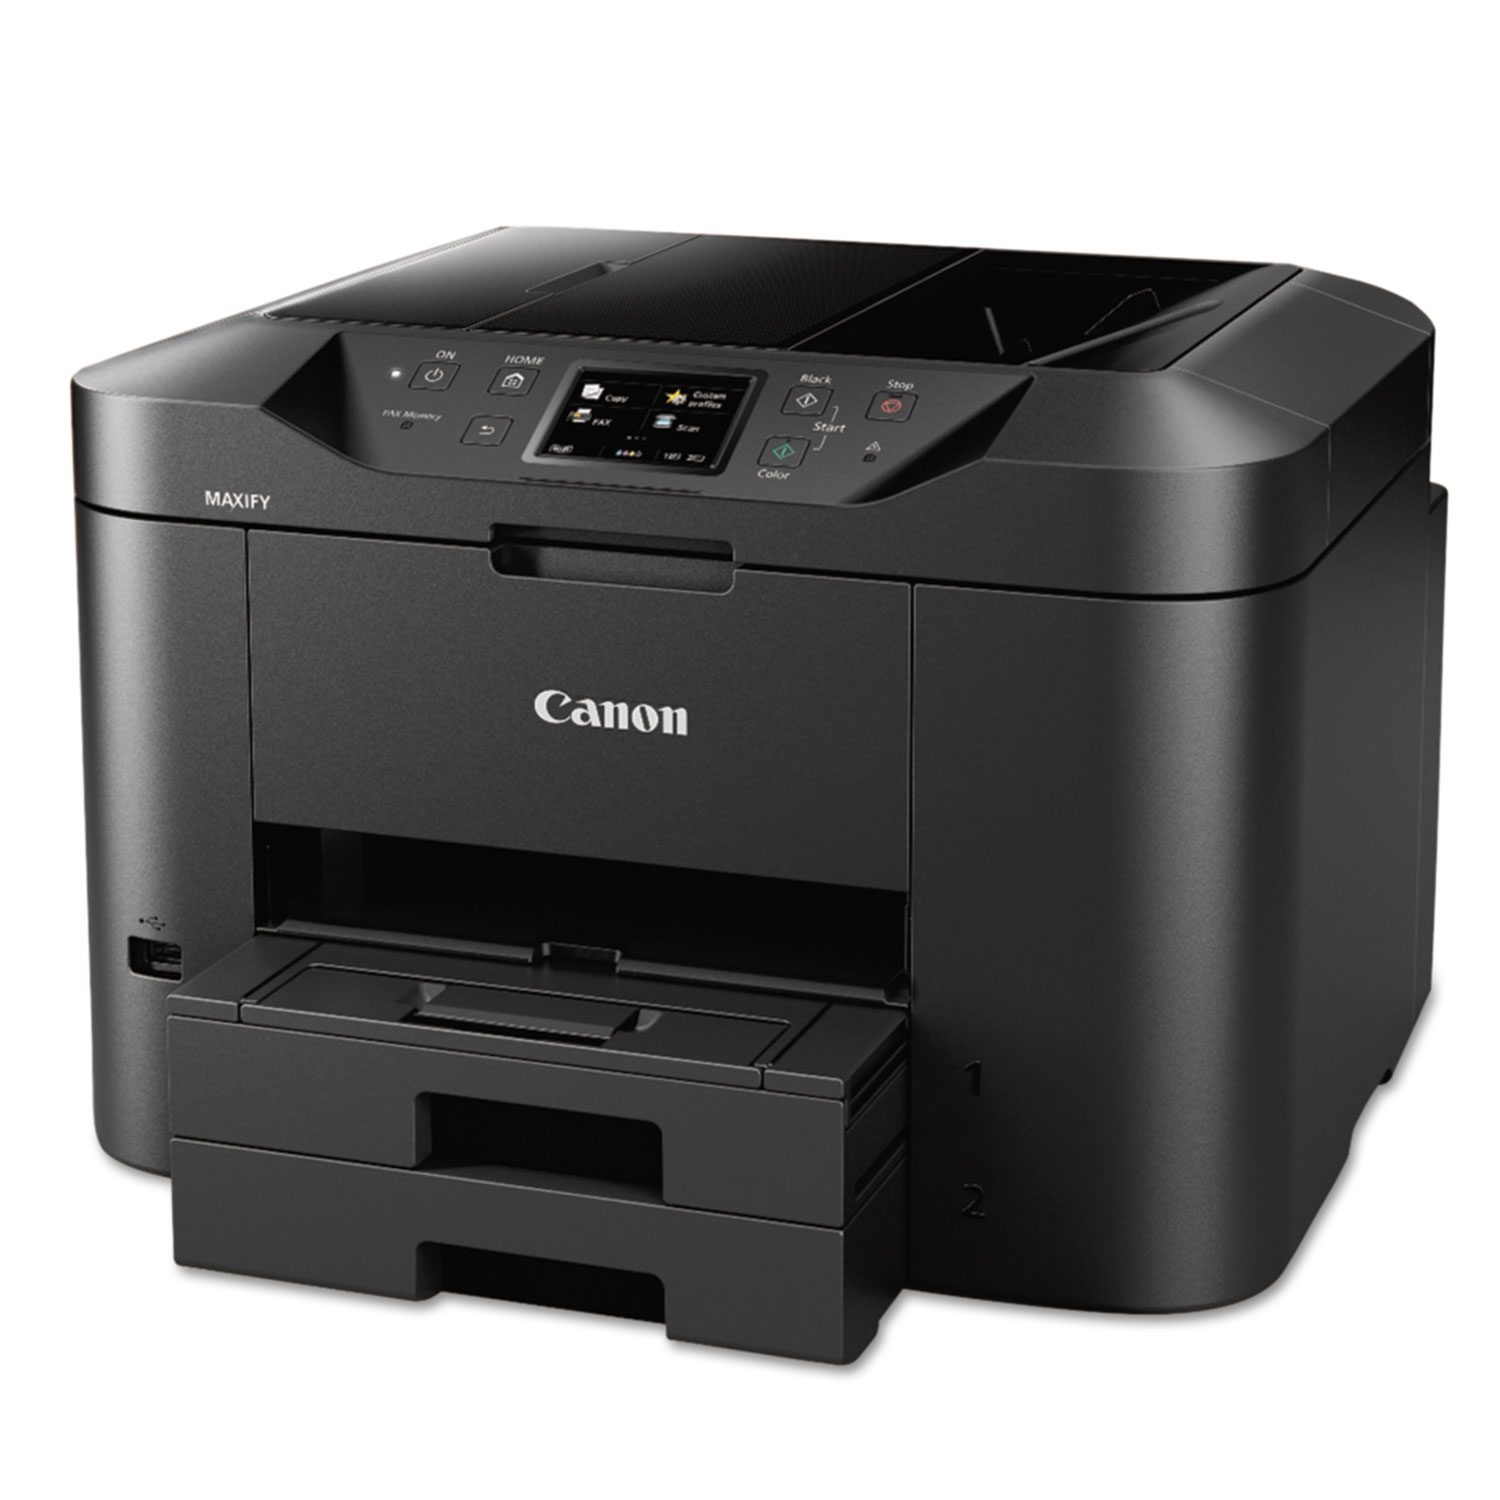  Canon 0958C002 MAXIFY MB2720 Wireless Home Office All-In-One Printer, Black (CNM0958C002) 